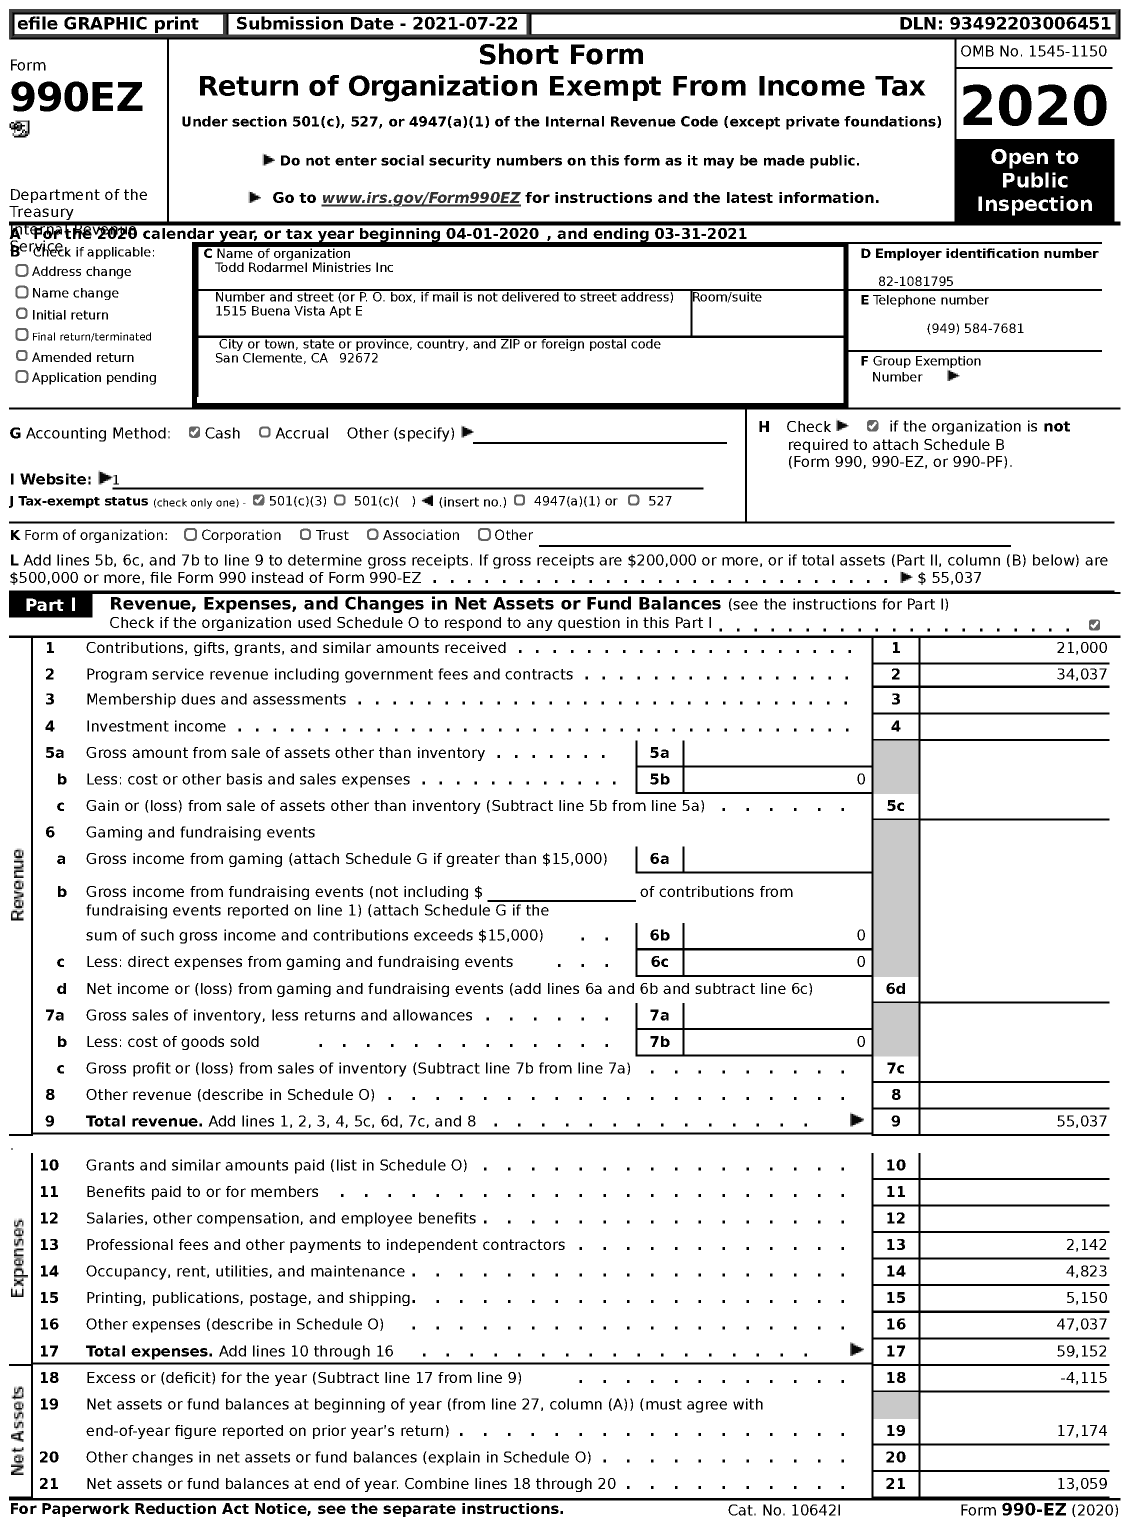 Image of first page of 2020 Form 990EZ for Todd Rodarmel Ministries